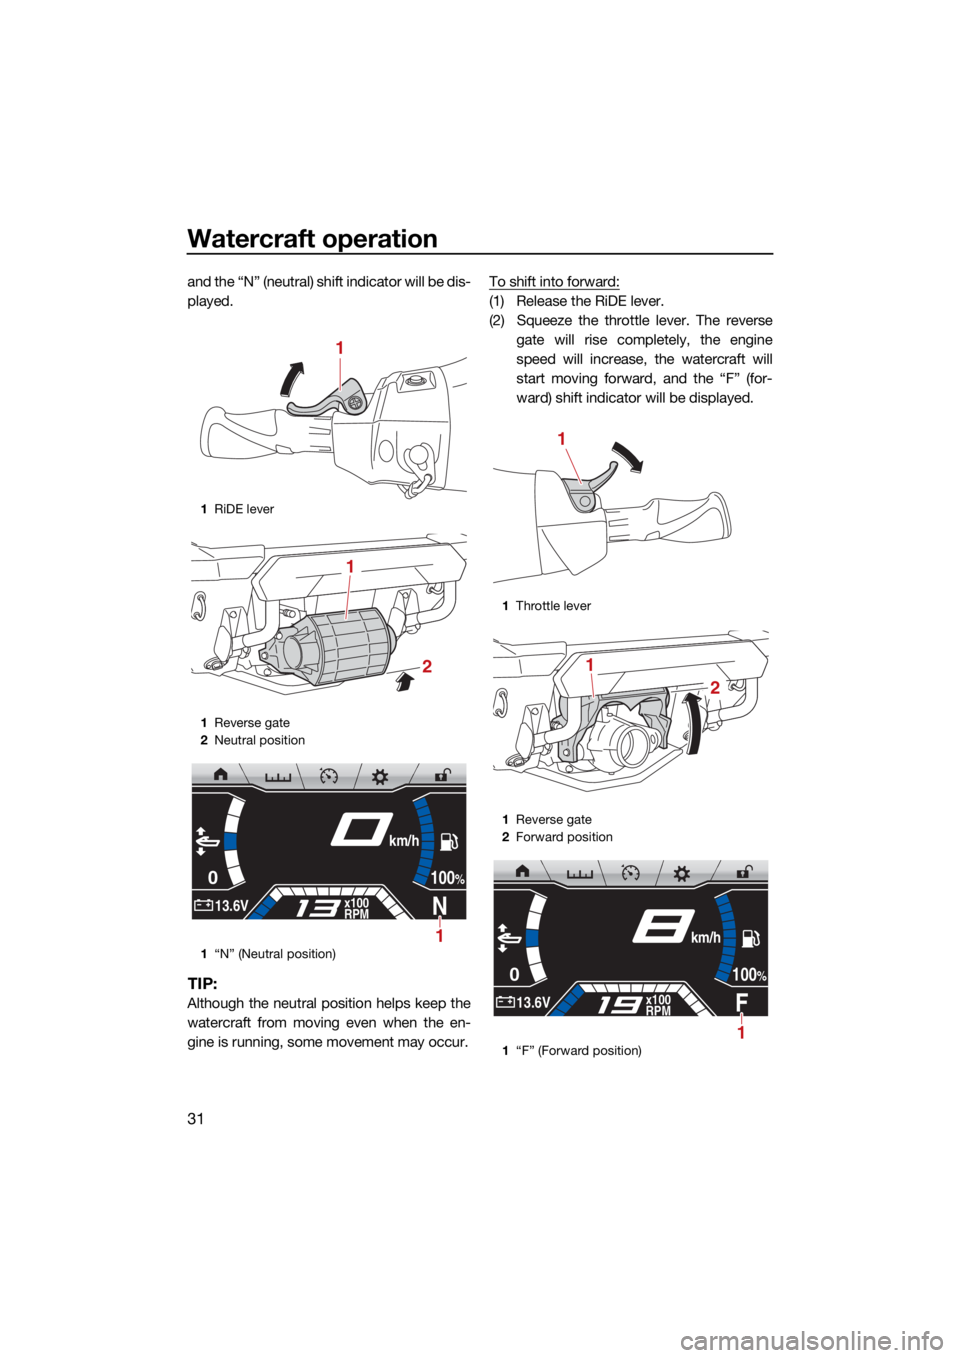 YAMAHA FX HO 2021 Owners Guide Watercraft operation
31
and the “N” (neutral) shift indicator will be dis-
played.
TIP:
Although the neutral position helps keep the
watercraft from moving even when the en-
gine is running, some 